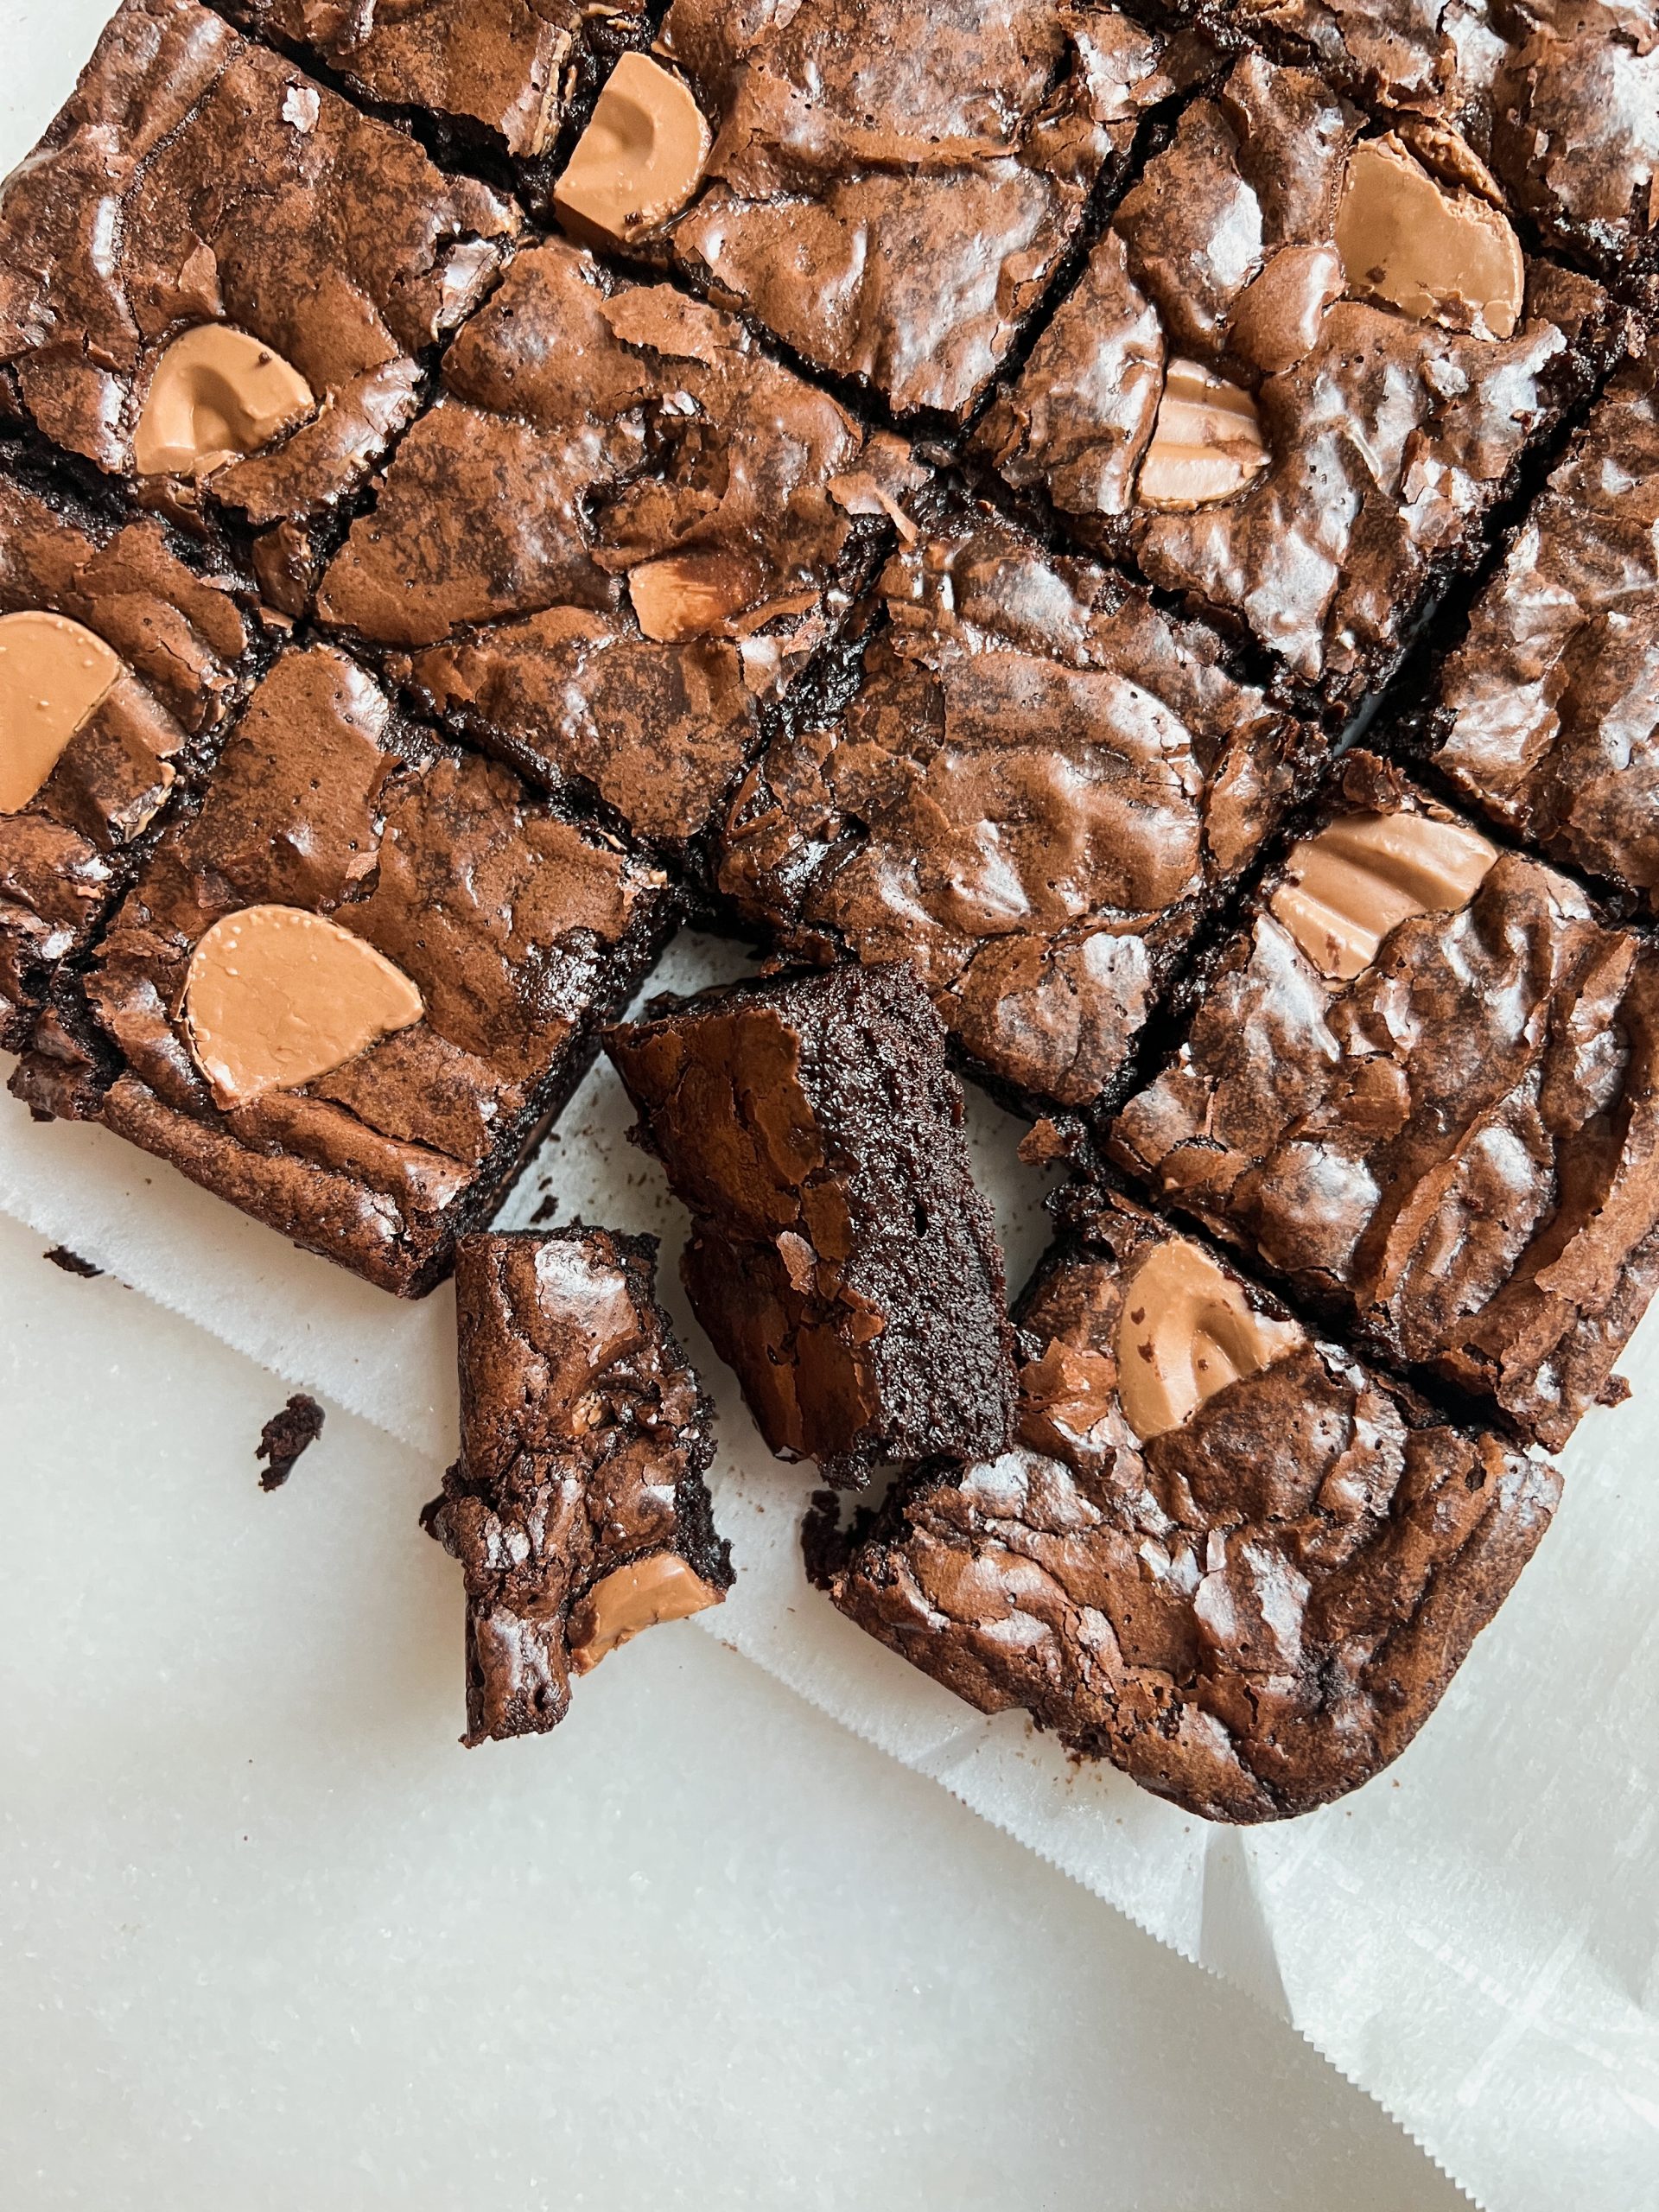 Overhead shot of brownies with shiny crinkly top, one brownie angled to show dark fudgy interior